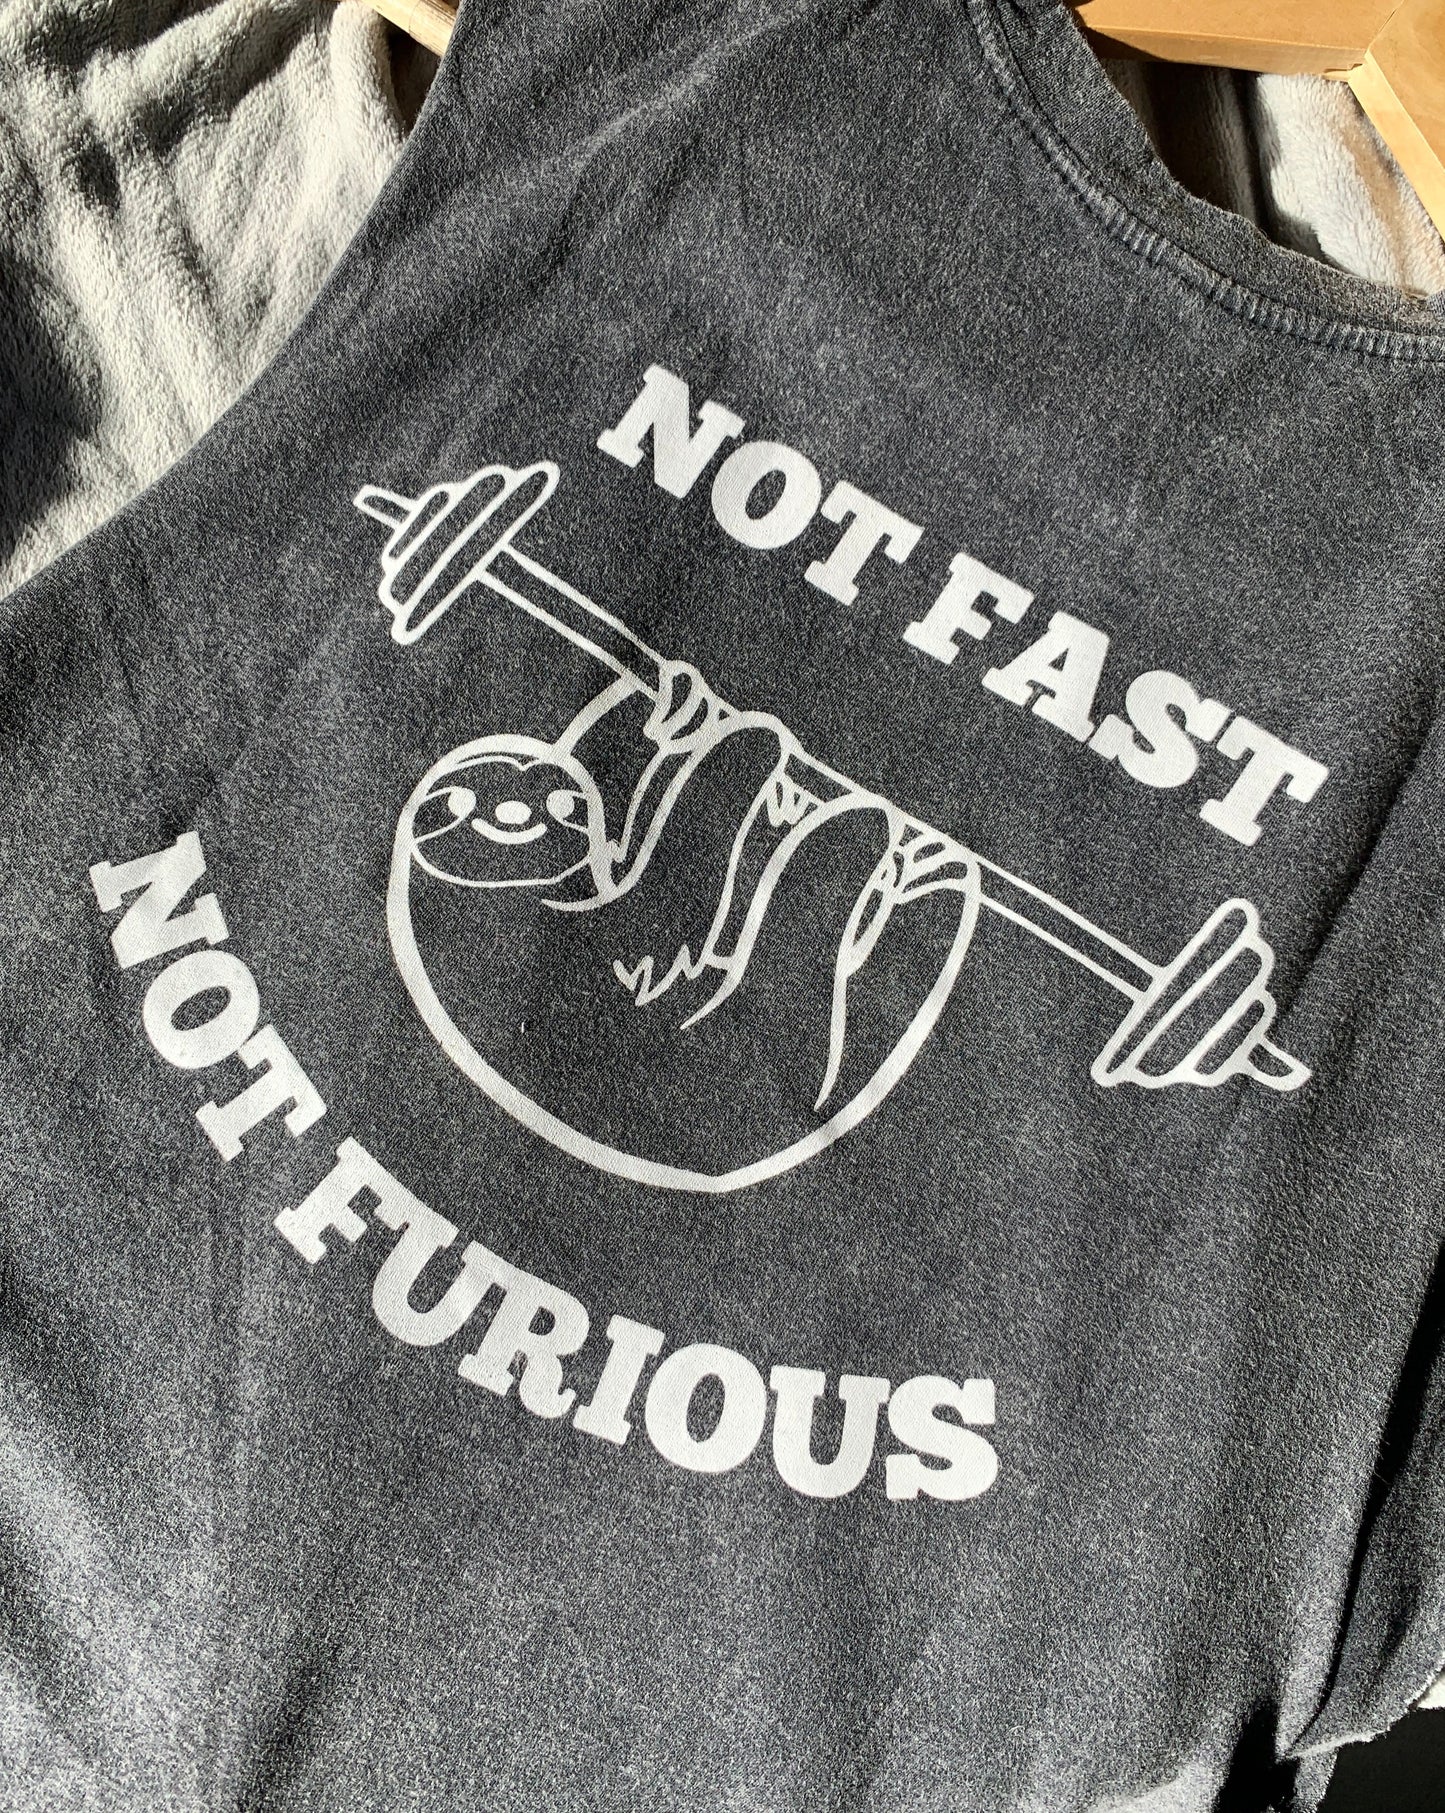 Not fast not furious (Barbell) muscle tank